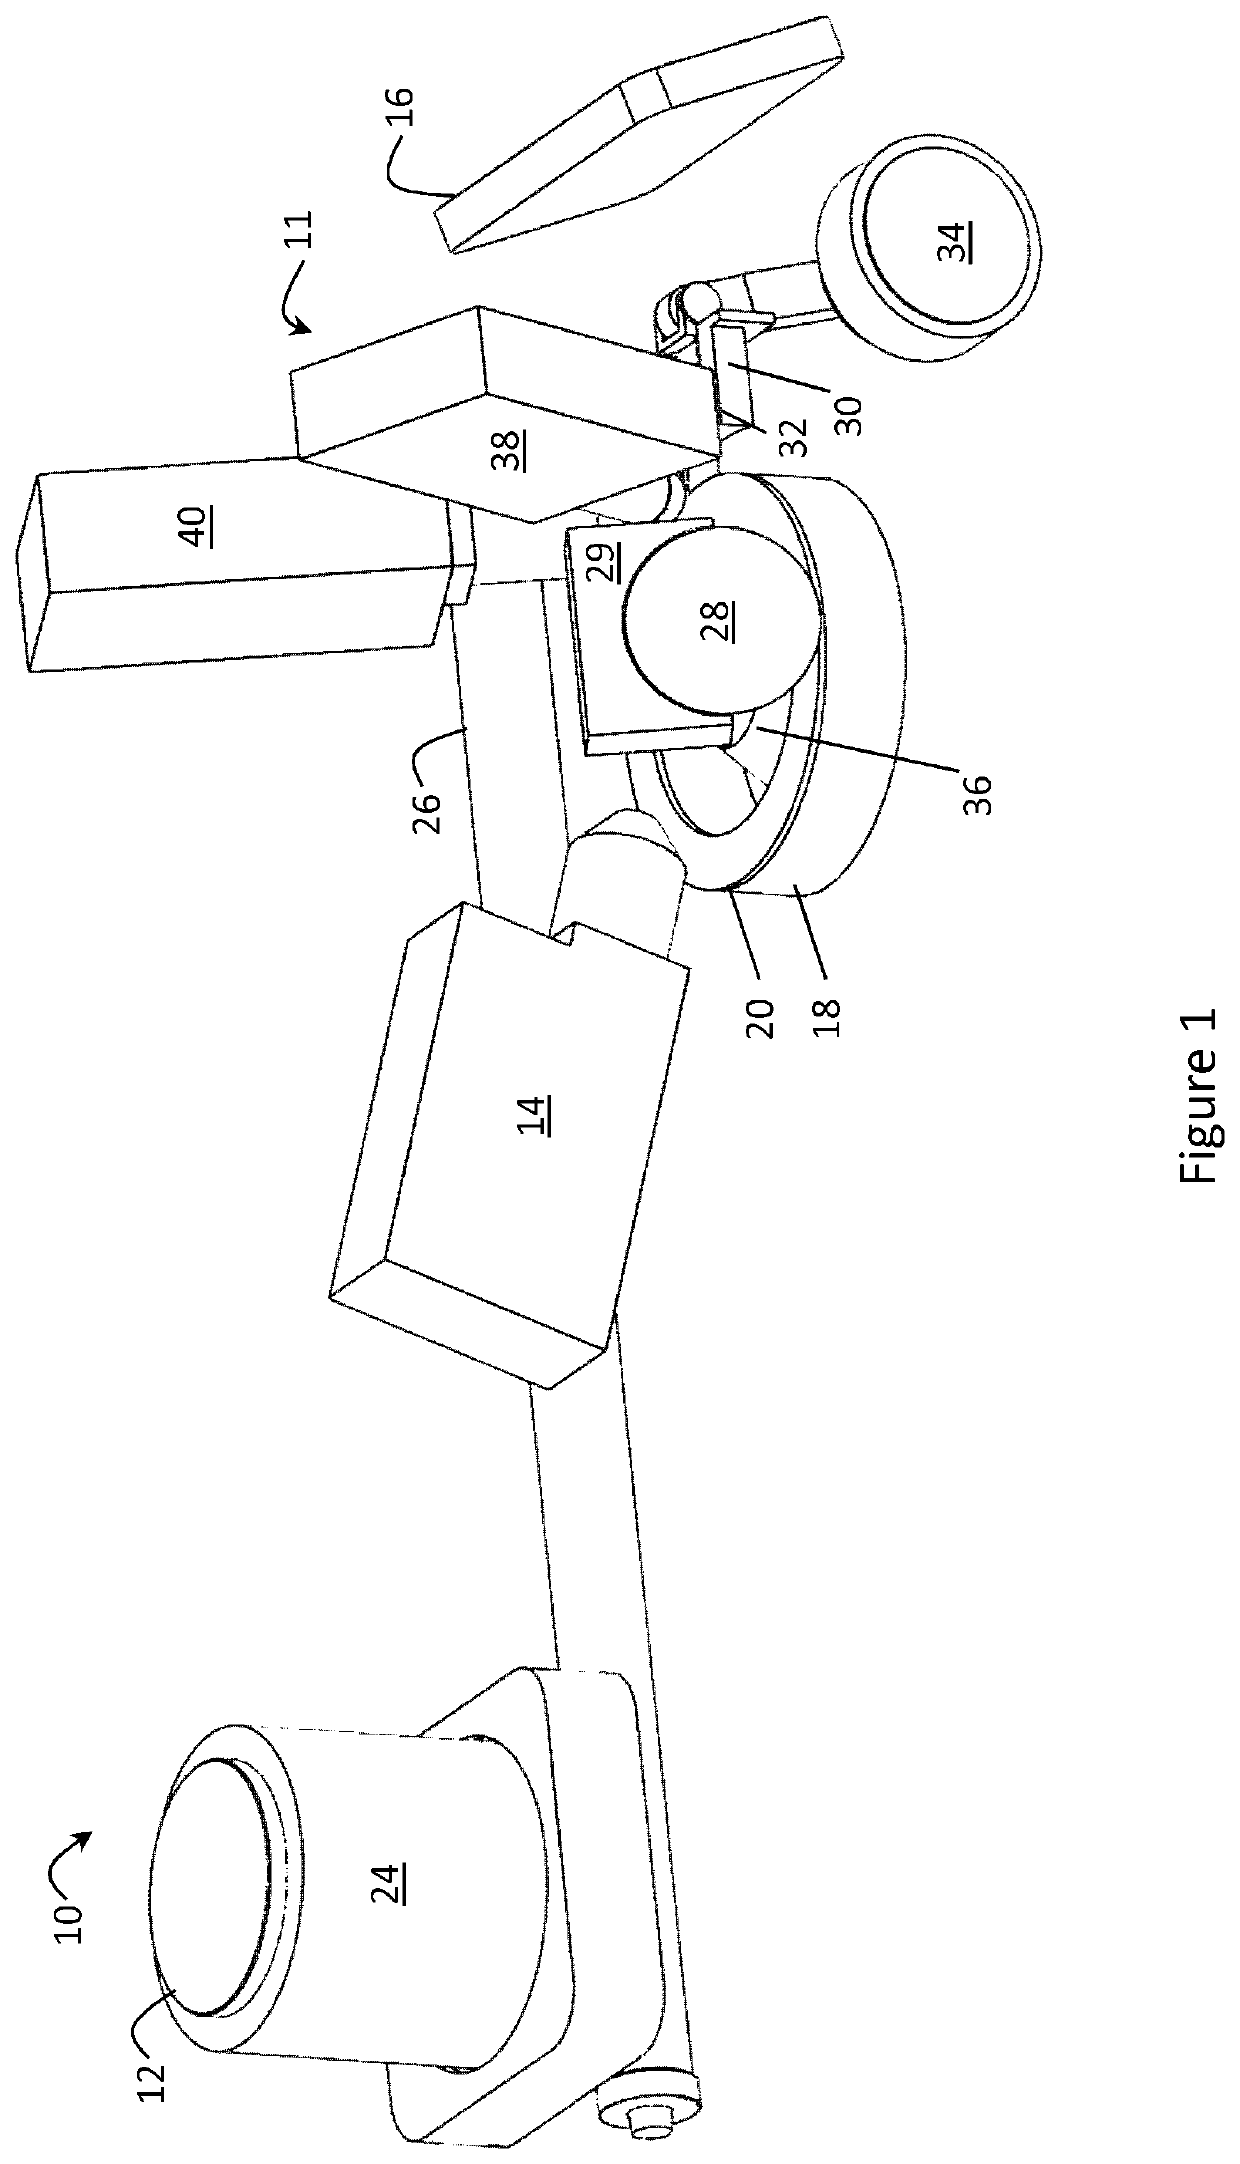 Method and apparatus for analysing particulate material